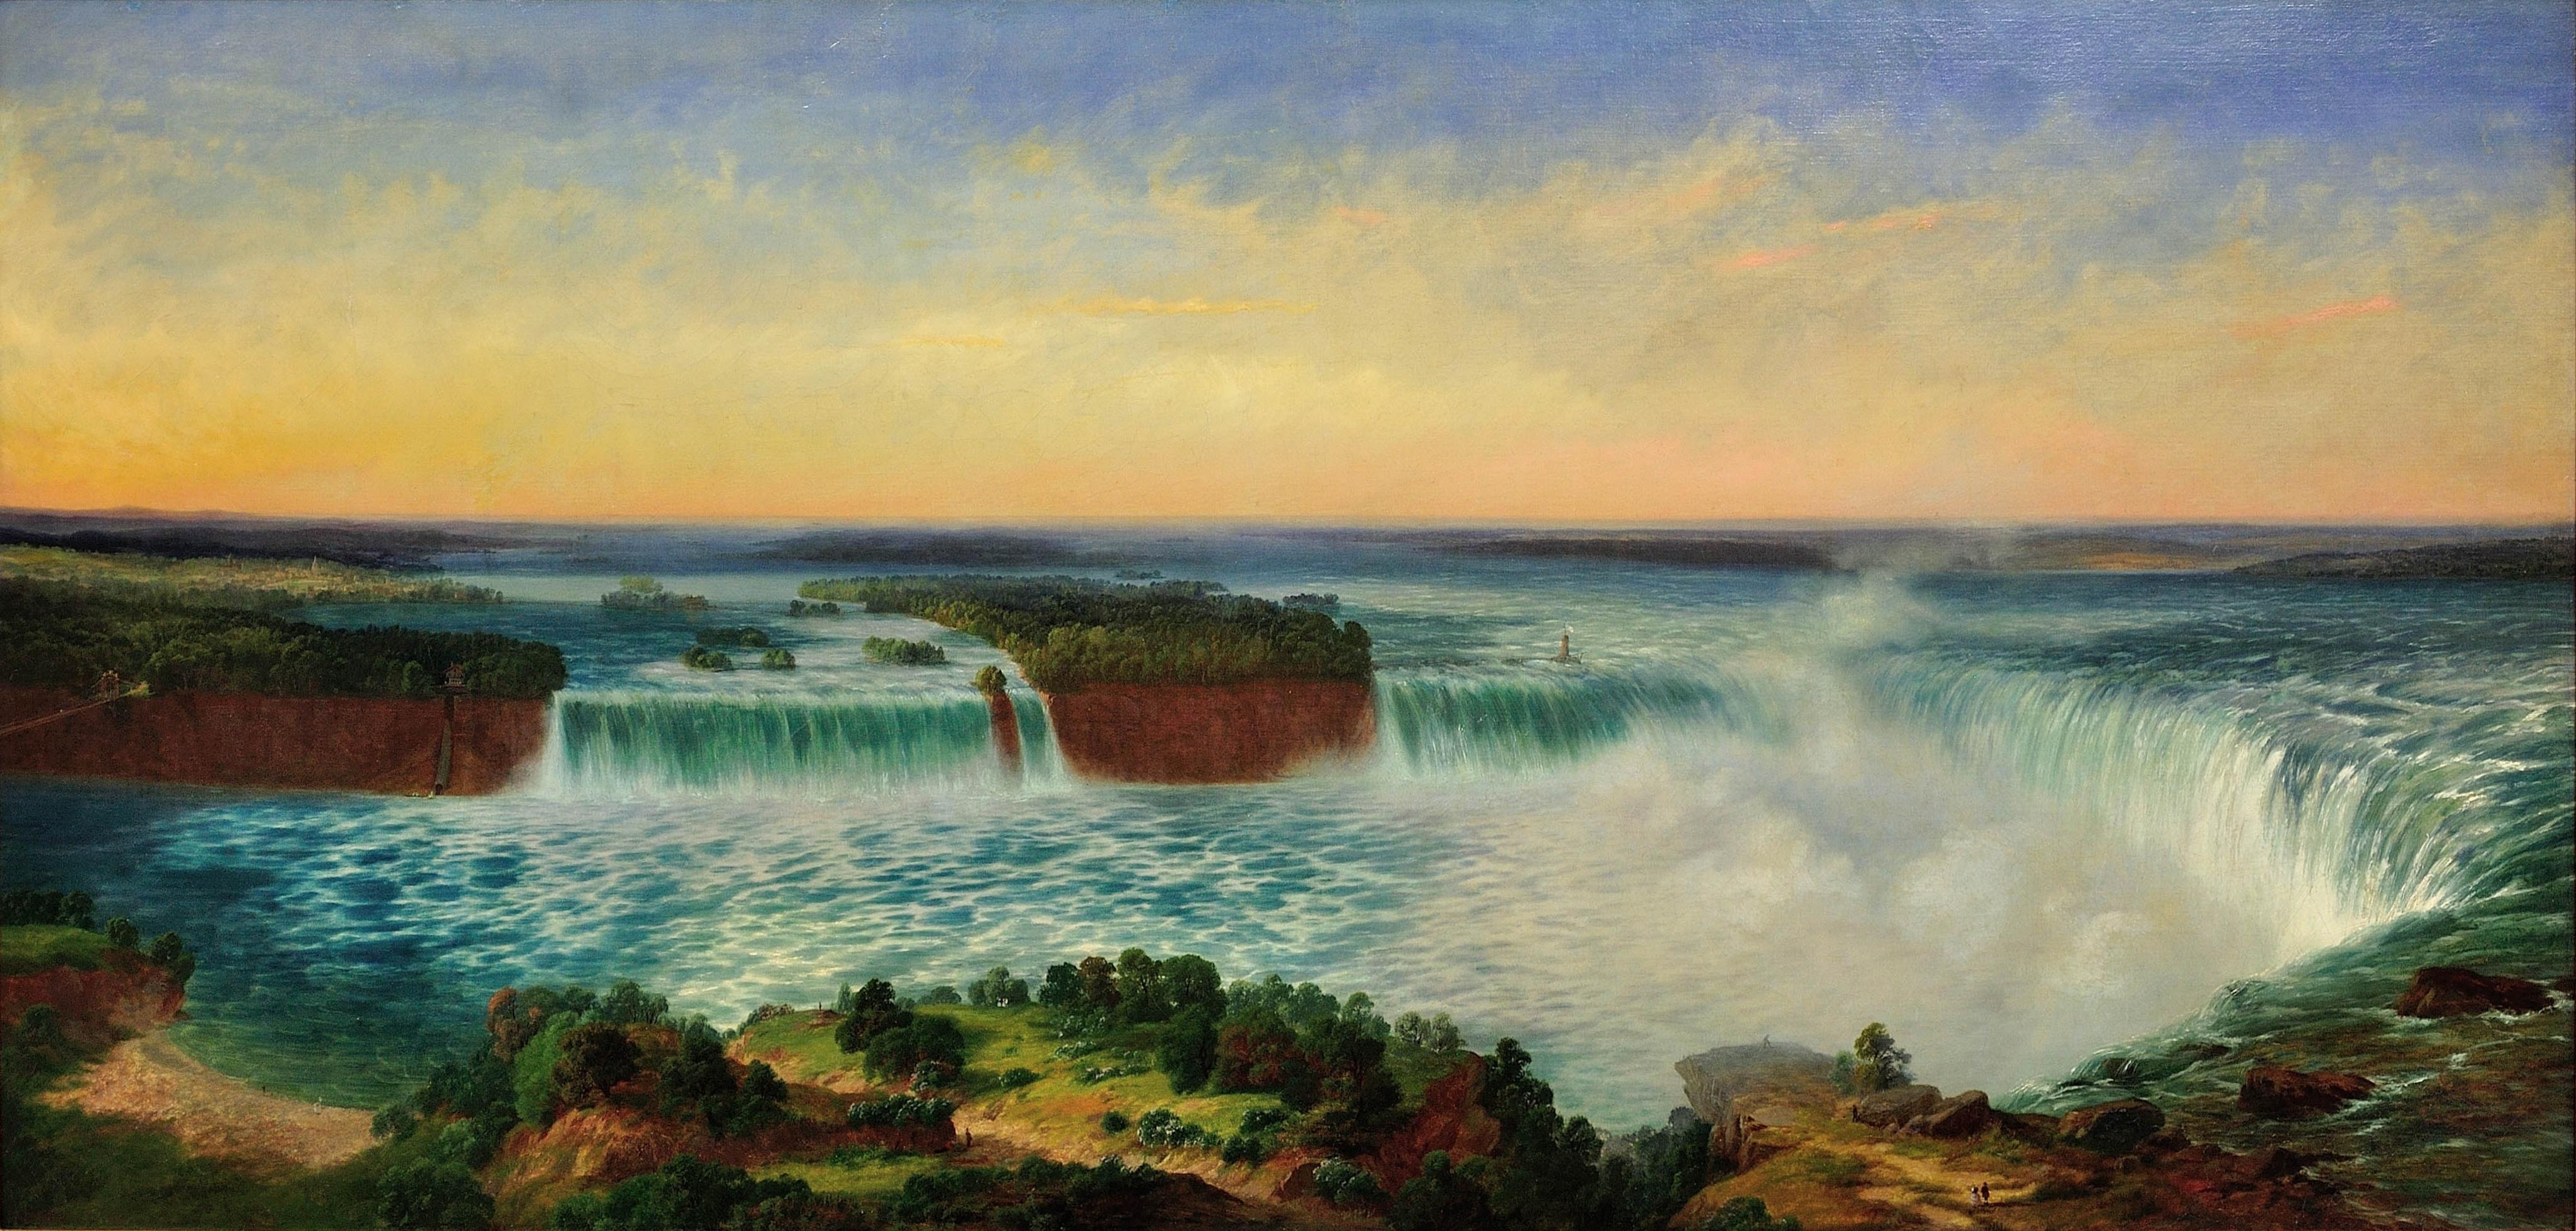 Niagara Falls, Ontario. View Across to New York State. Buffalo NY in Distance.  - Painting by Alexandre Le Bihan